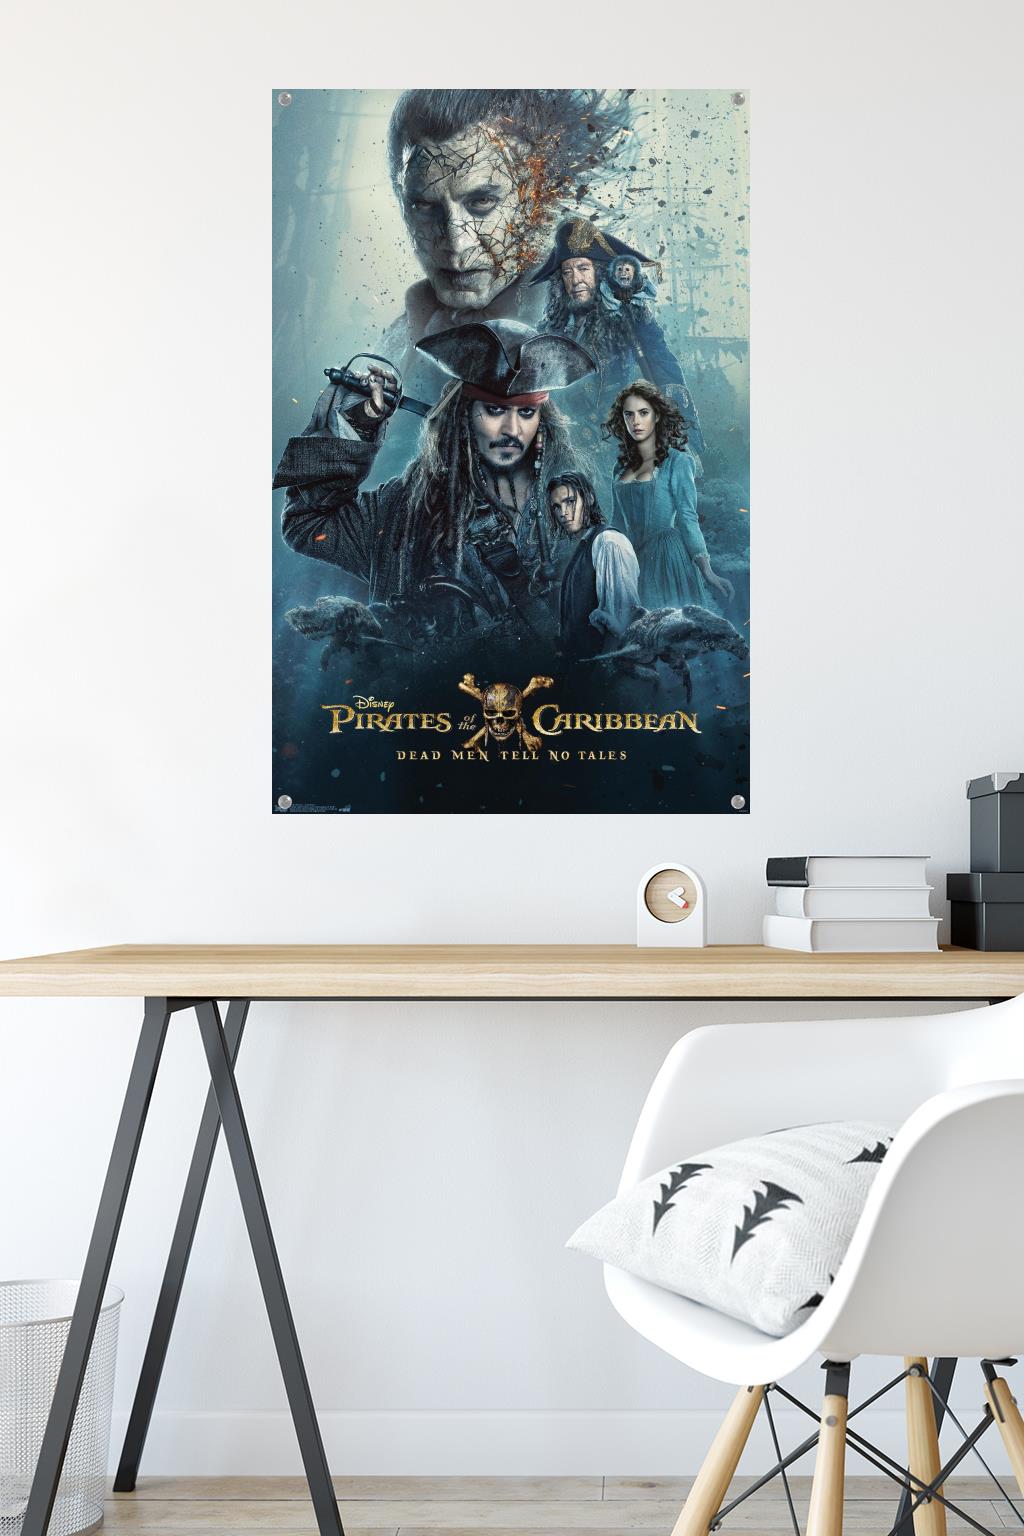 Disney Pirates of the Caribbean: Dead Men Tell No Tales - One Sheet Wall Poster with Push Pins, 22.375" x 34" - image 2 of 6